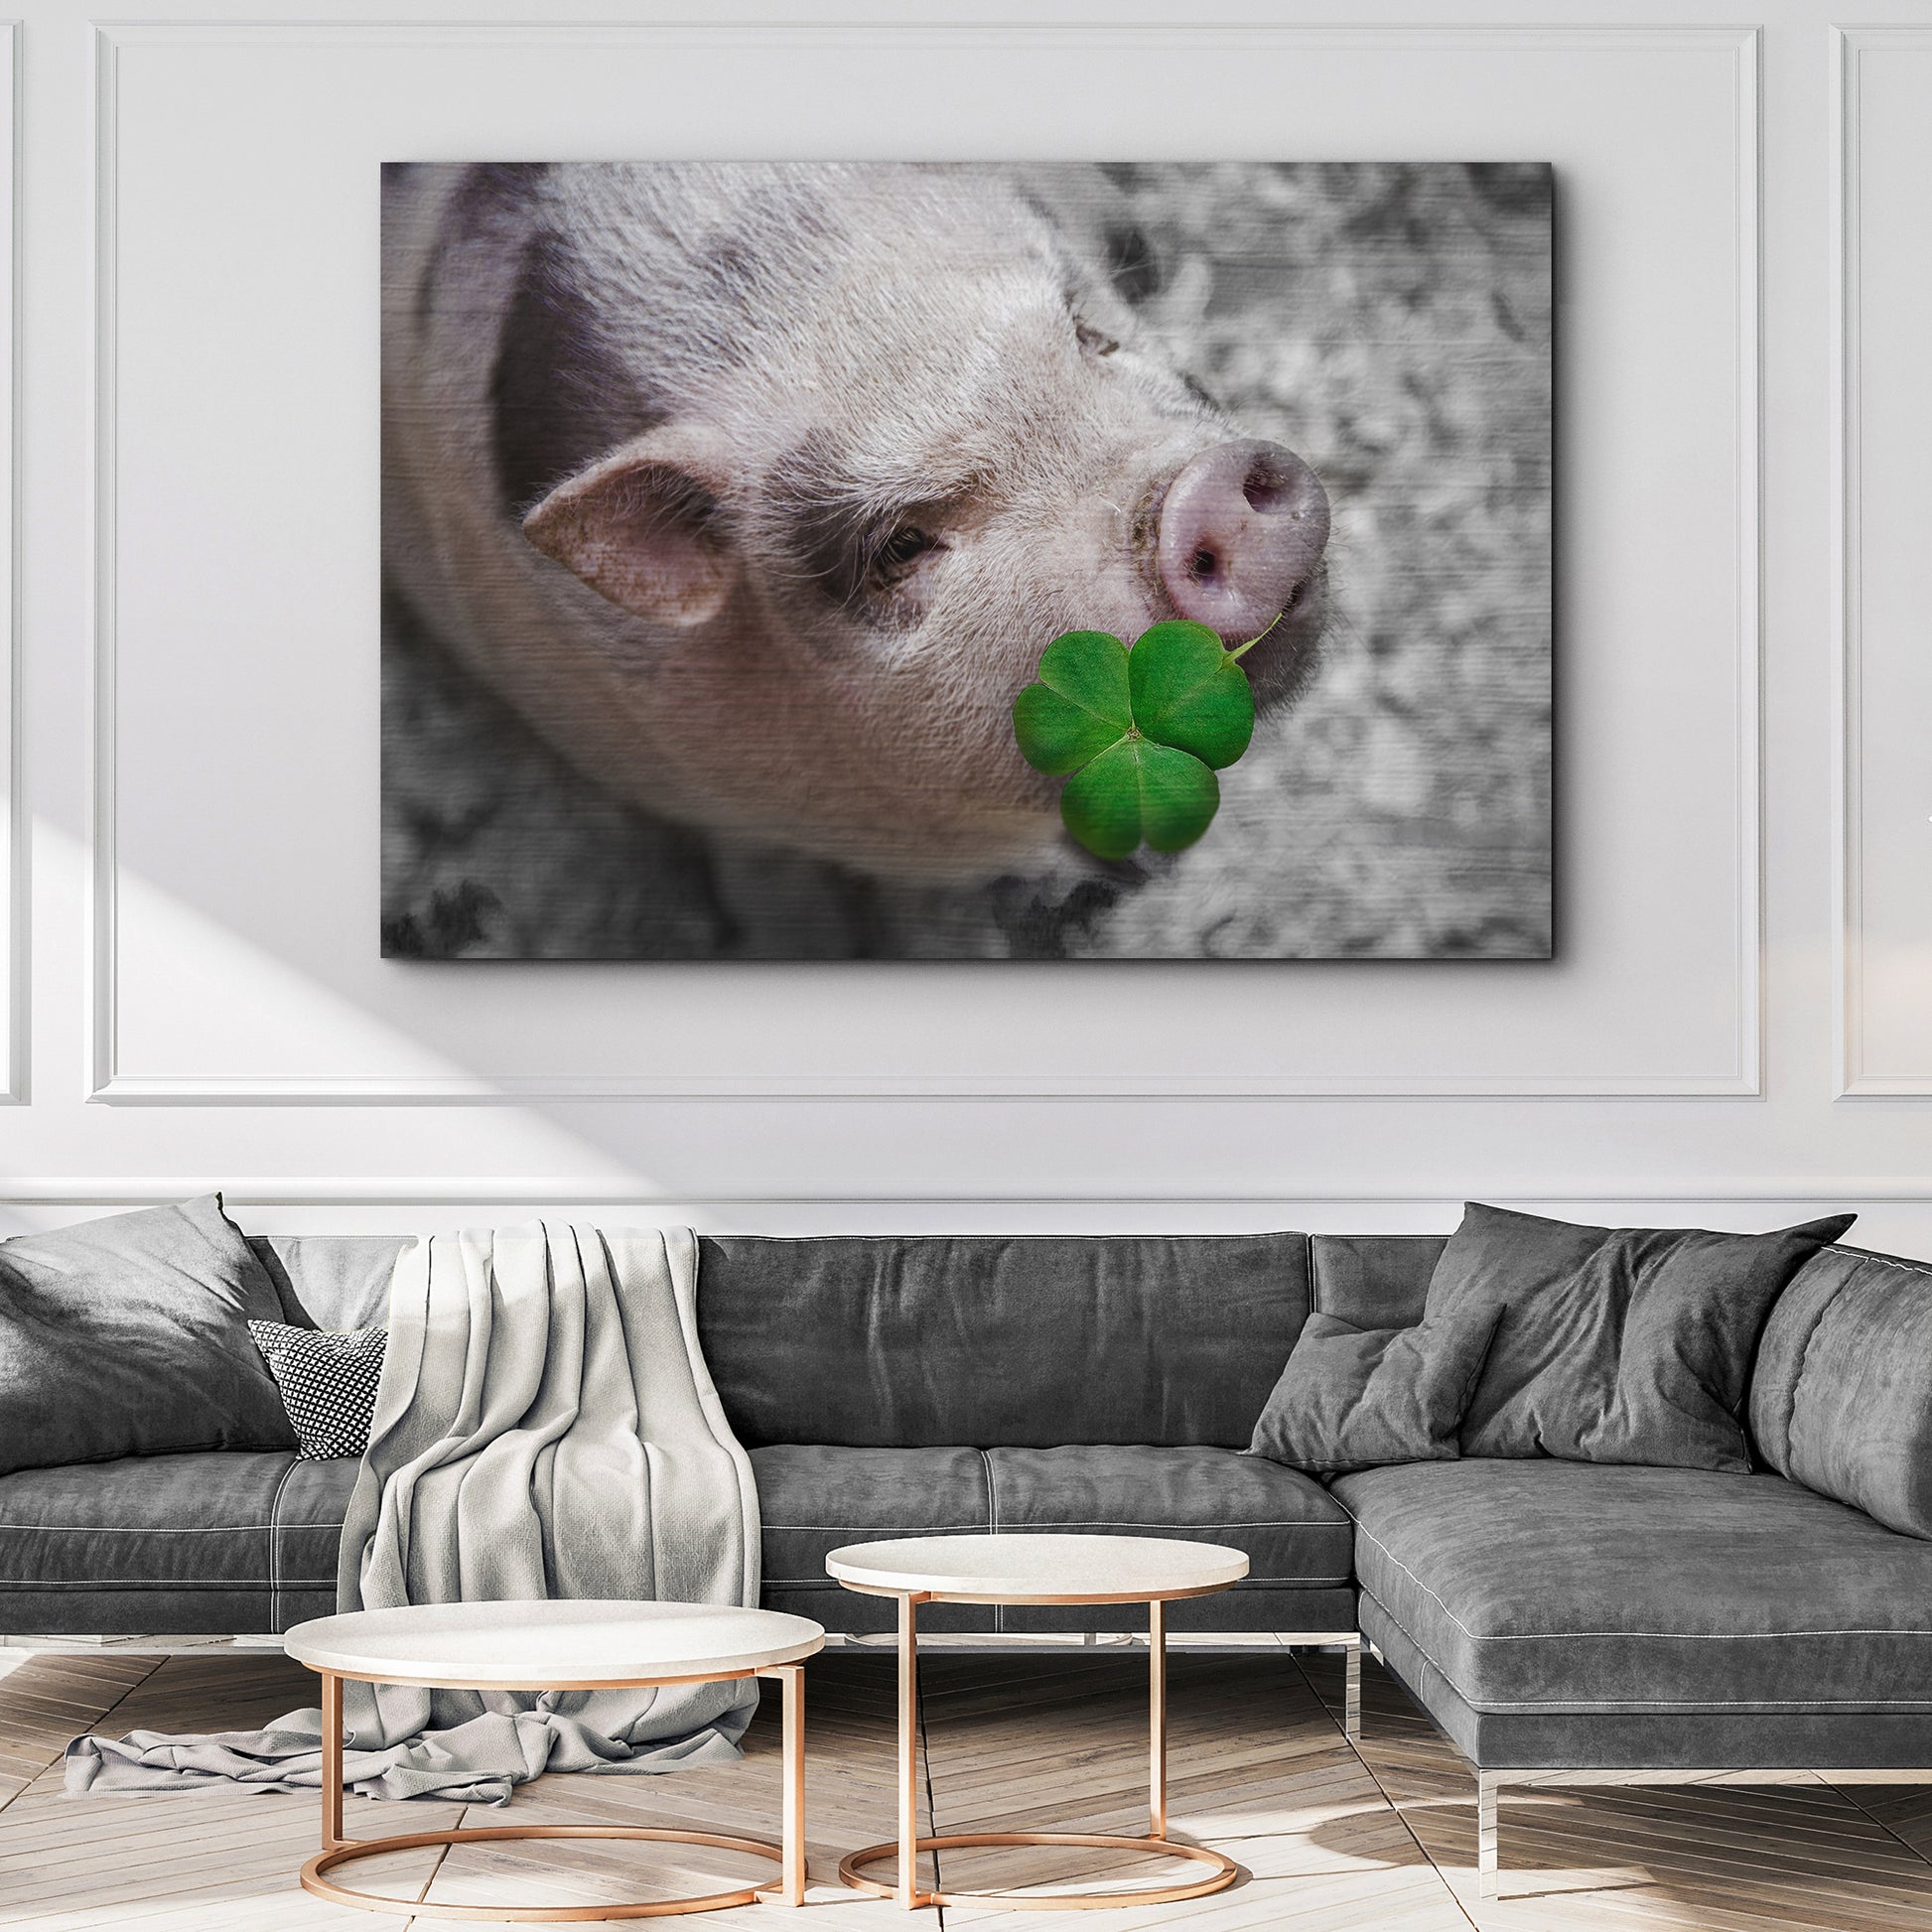 Pig With Shamrock Canvas Wall Art Style 2 - Image by Tailored Canvases